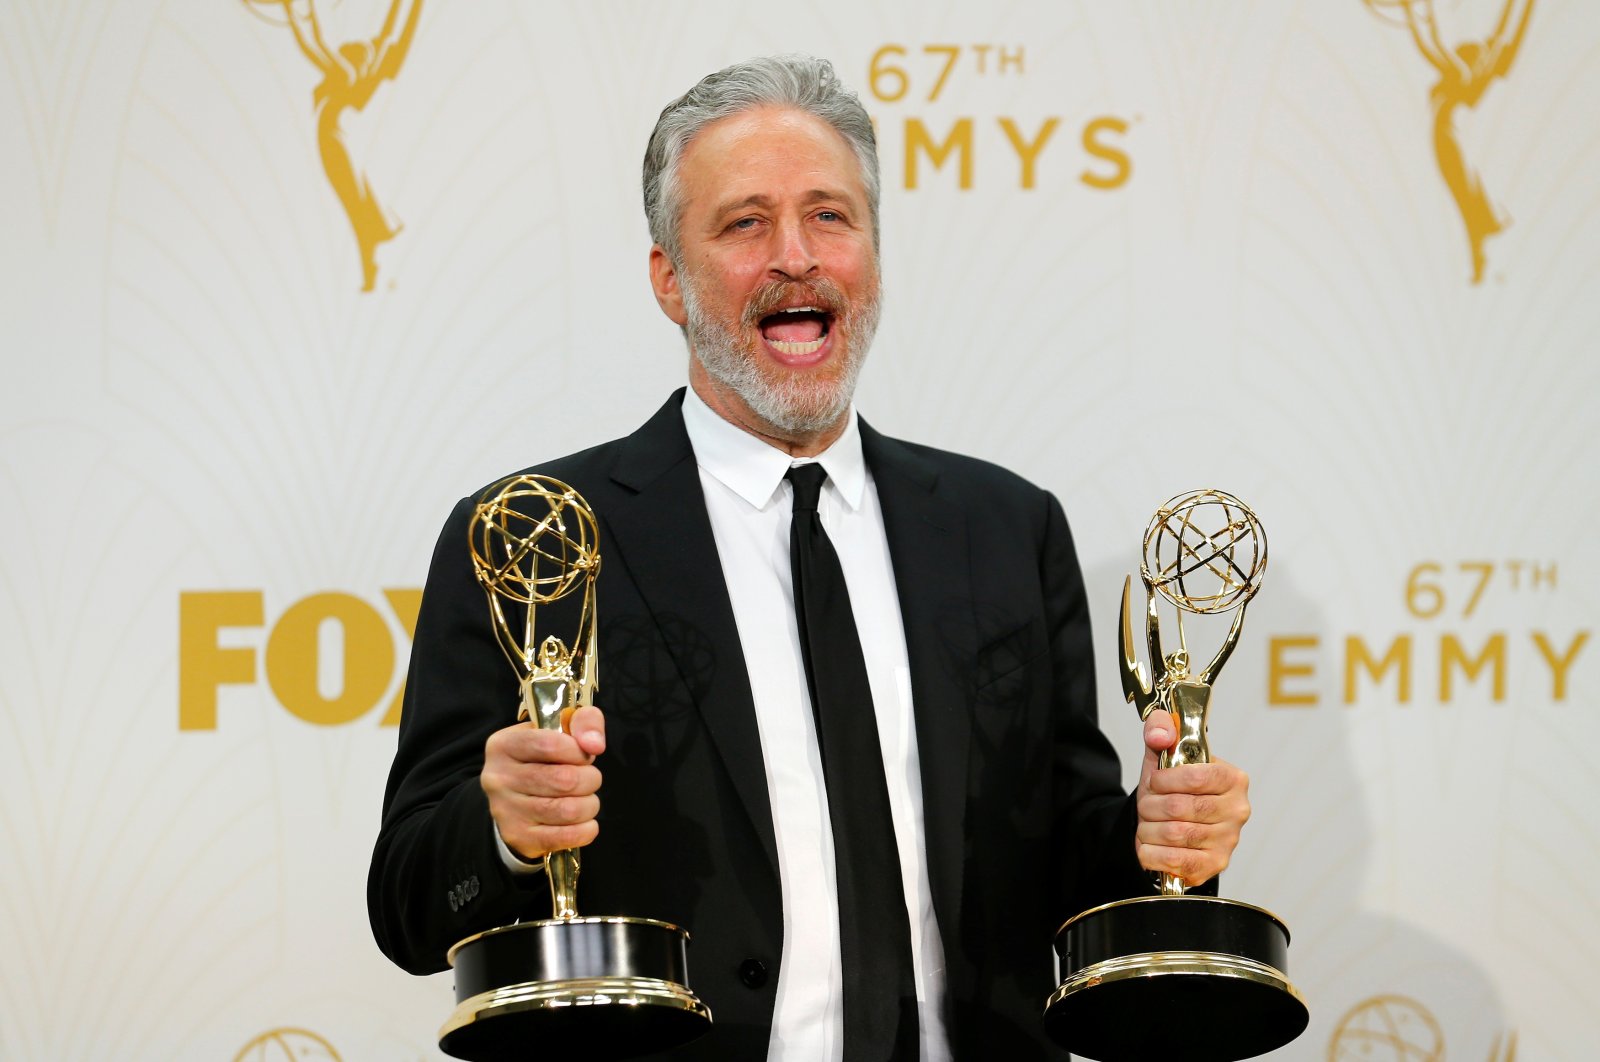 Jon Stewart holds his awards for Comedy Central's "The Daily Show With Jon Stewart" during the 67th Primetime Emmy Awards in Los Angeles, California, U.S., Sept. 20, 2015. (Reuters Photo)